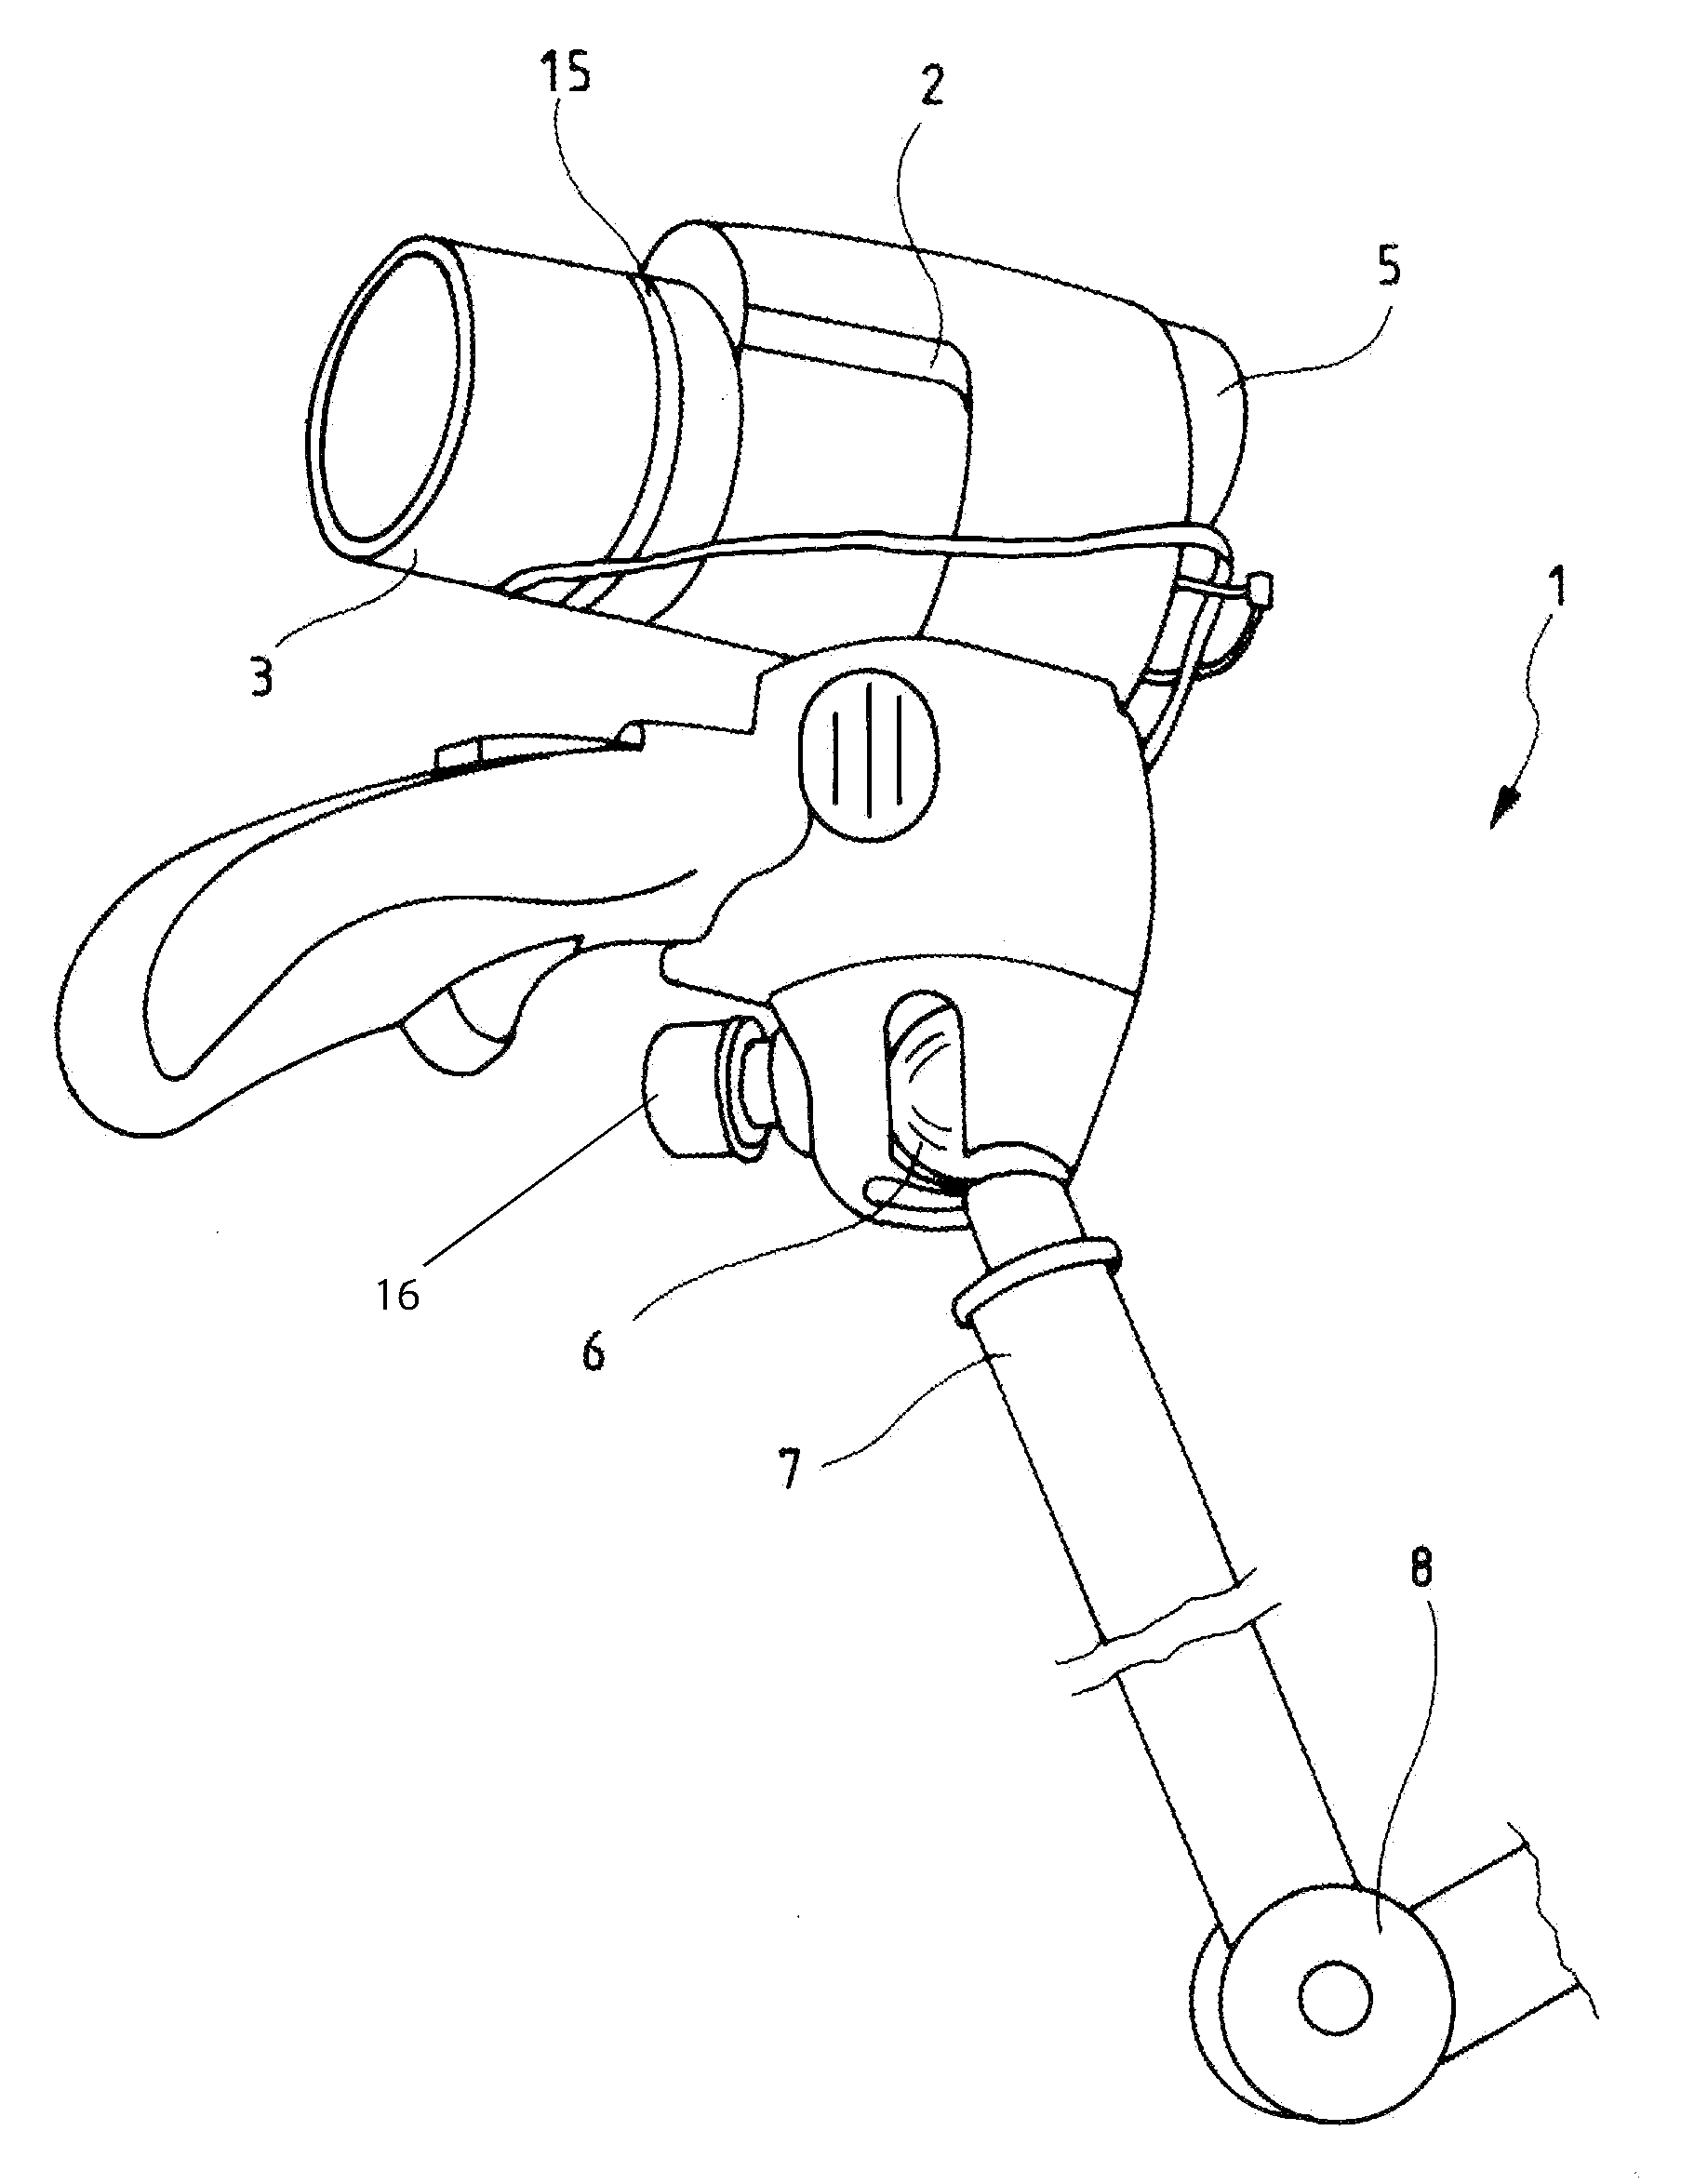 Medical magnification device